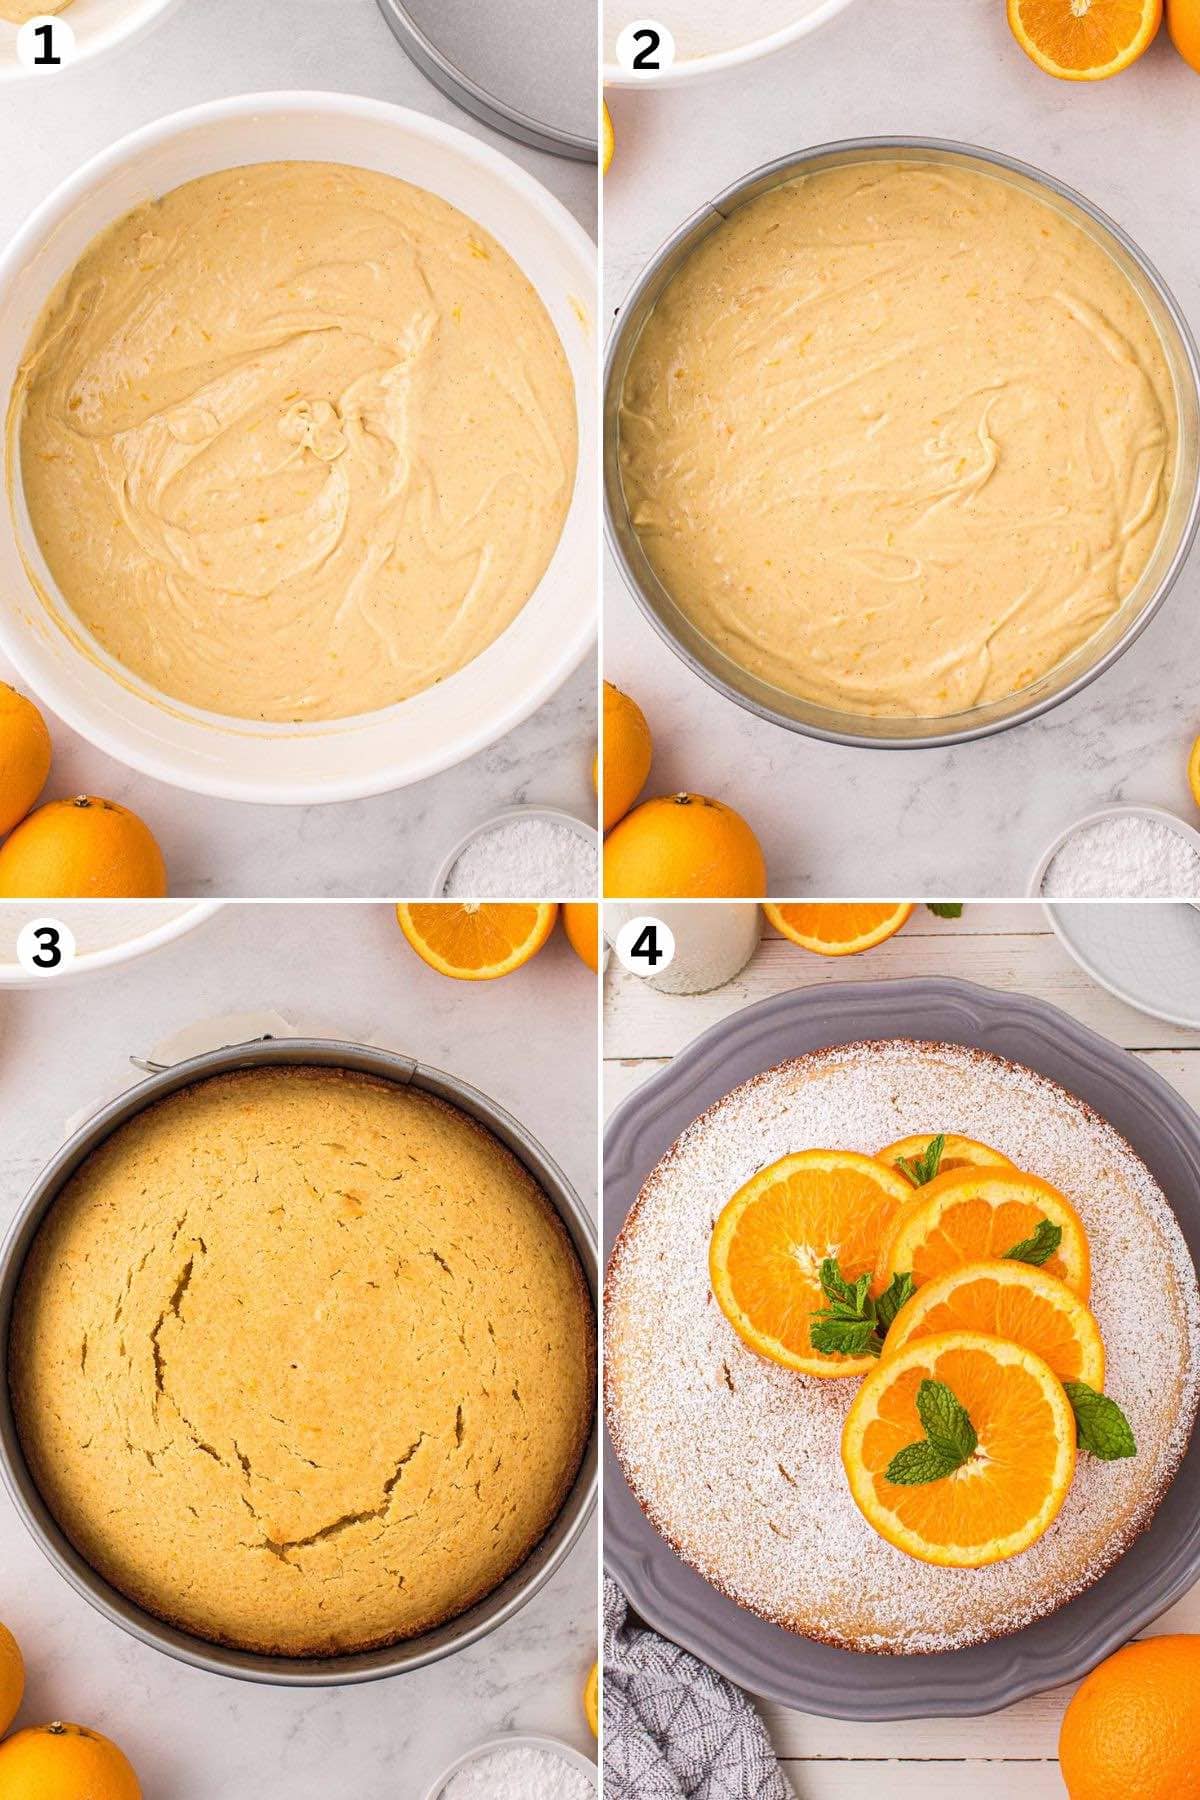 In a bowl mix the ingredients to make th cake batter. Bake the batter. Sprinkle powdered sugar and add orange slices on top